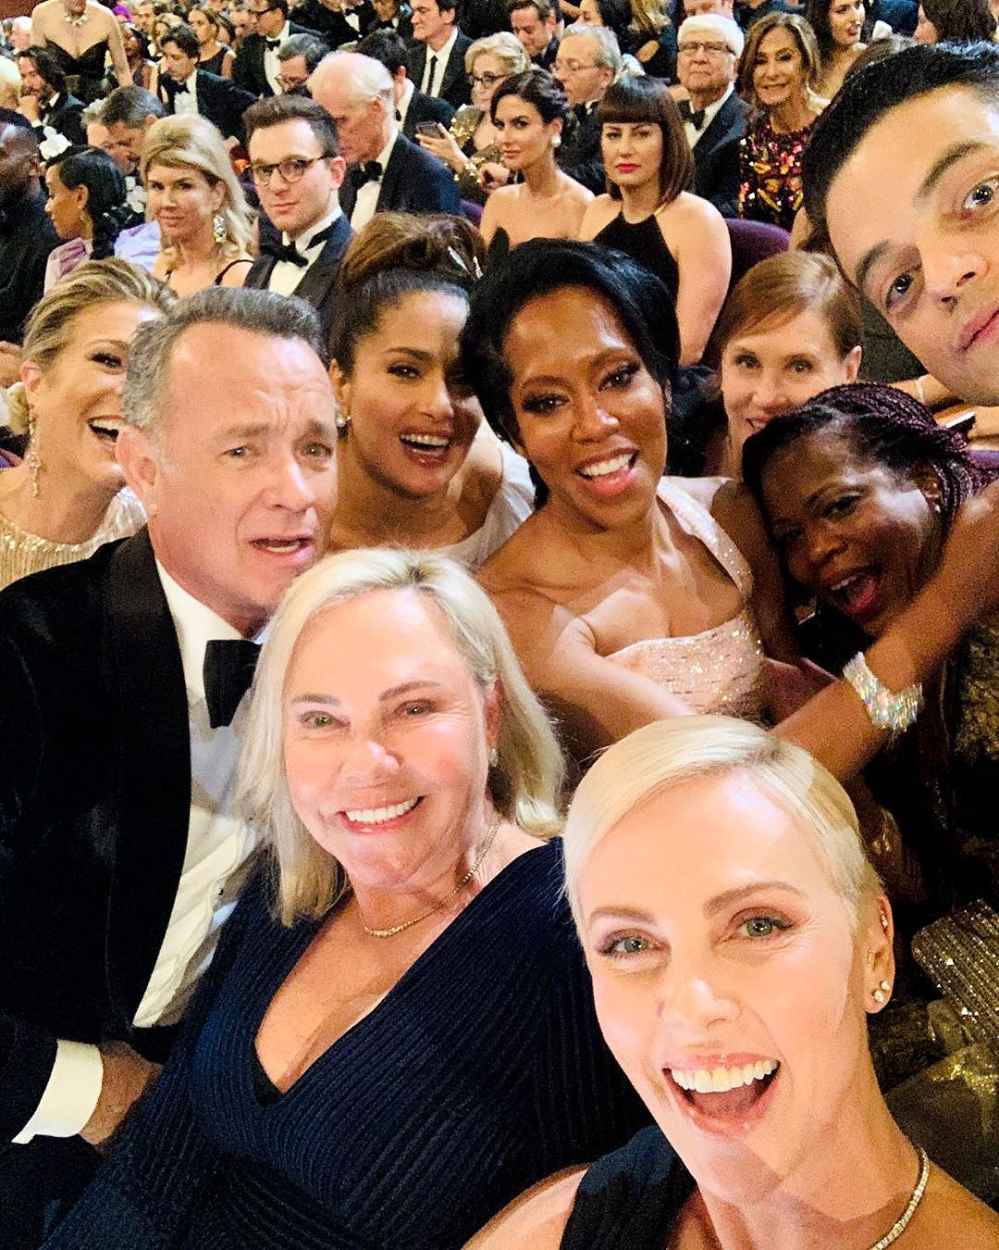 How Many Celebs Can You Spot in This 2020 Oscars Selfie